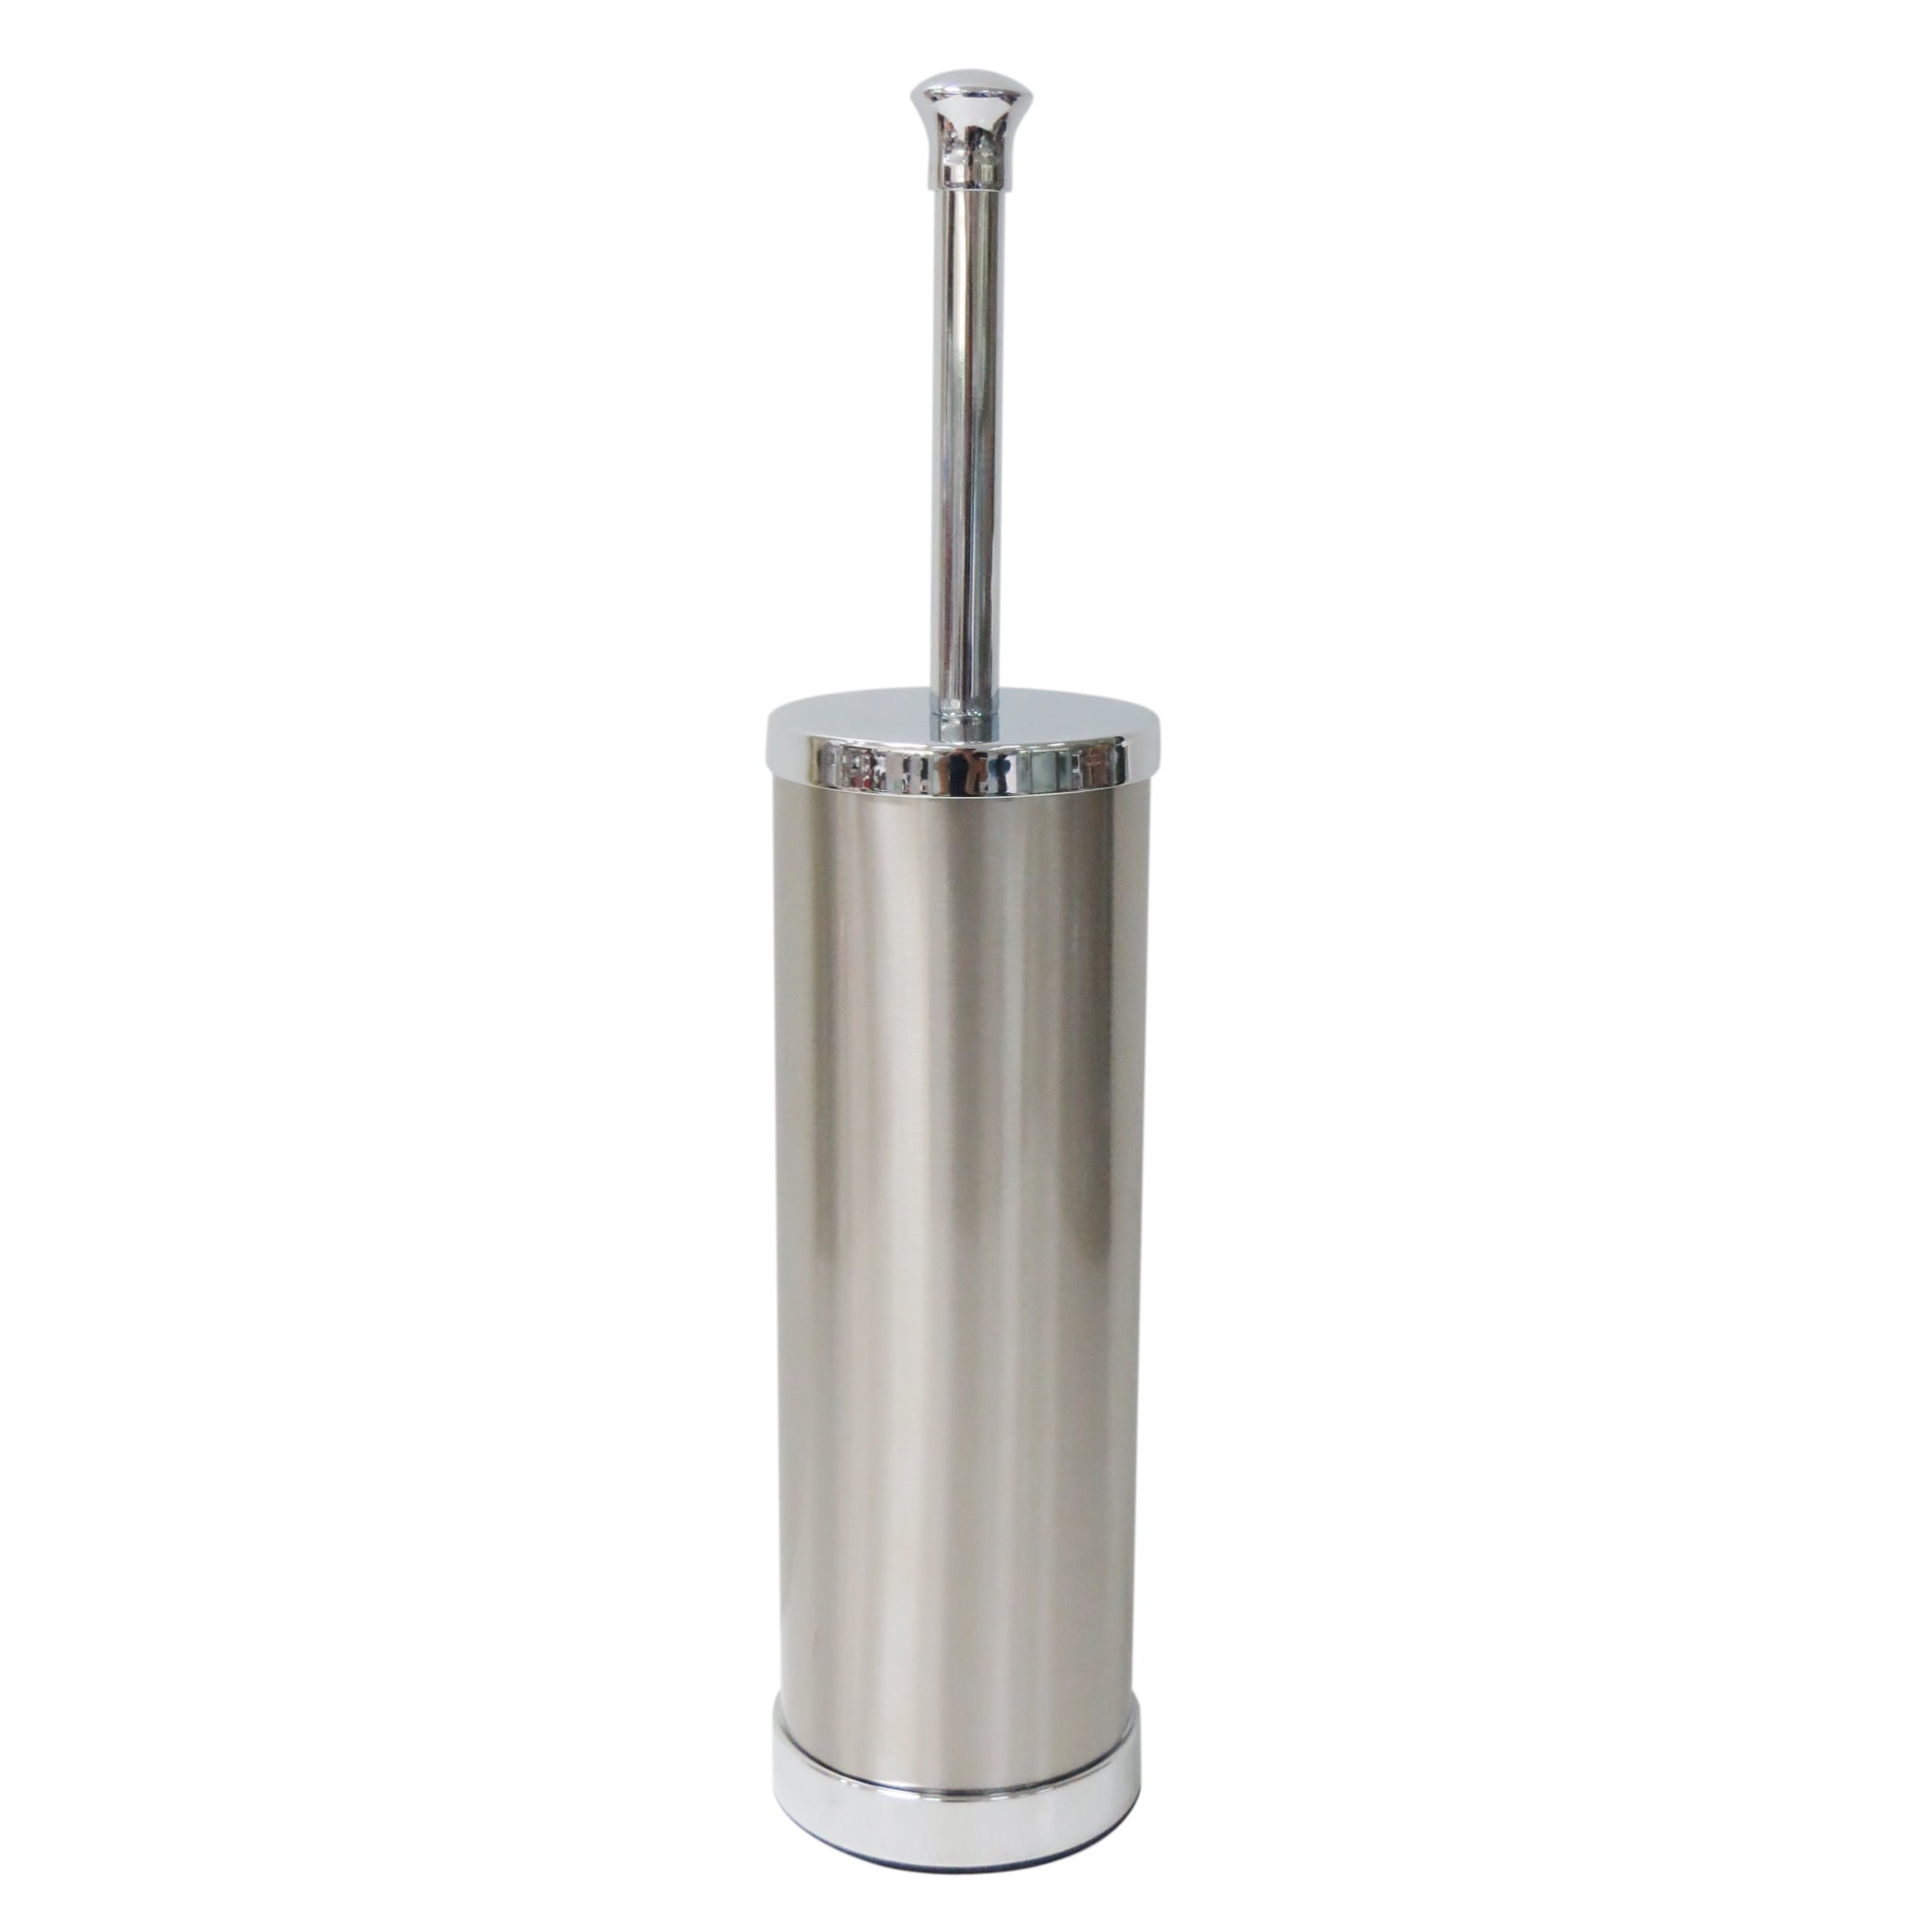 Toilet Brush with Decorative Stainless Steel Metal Container